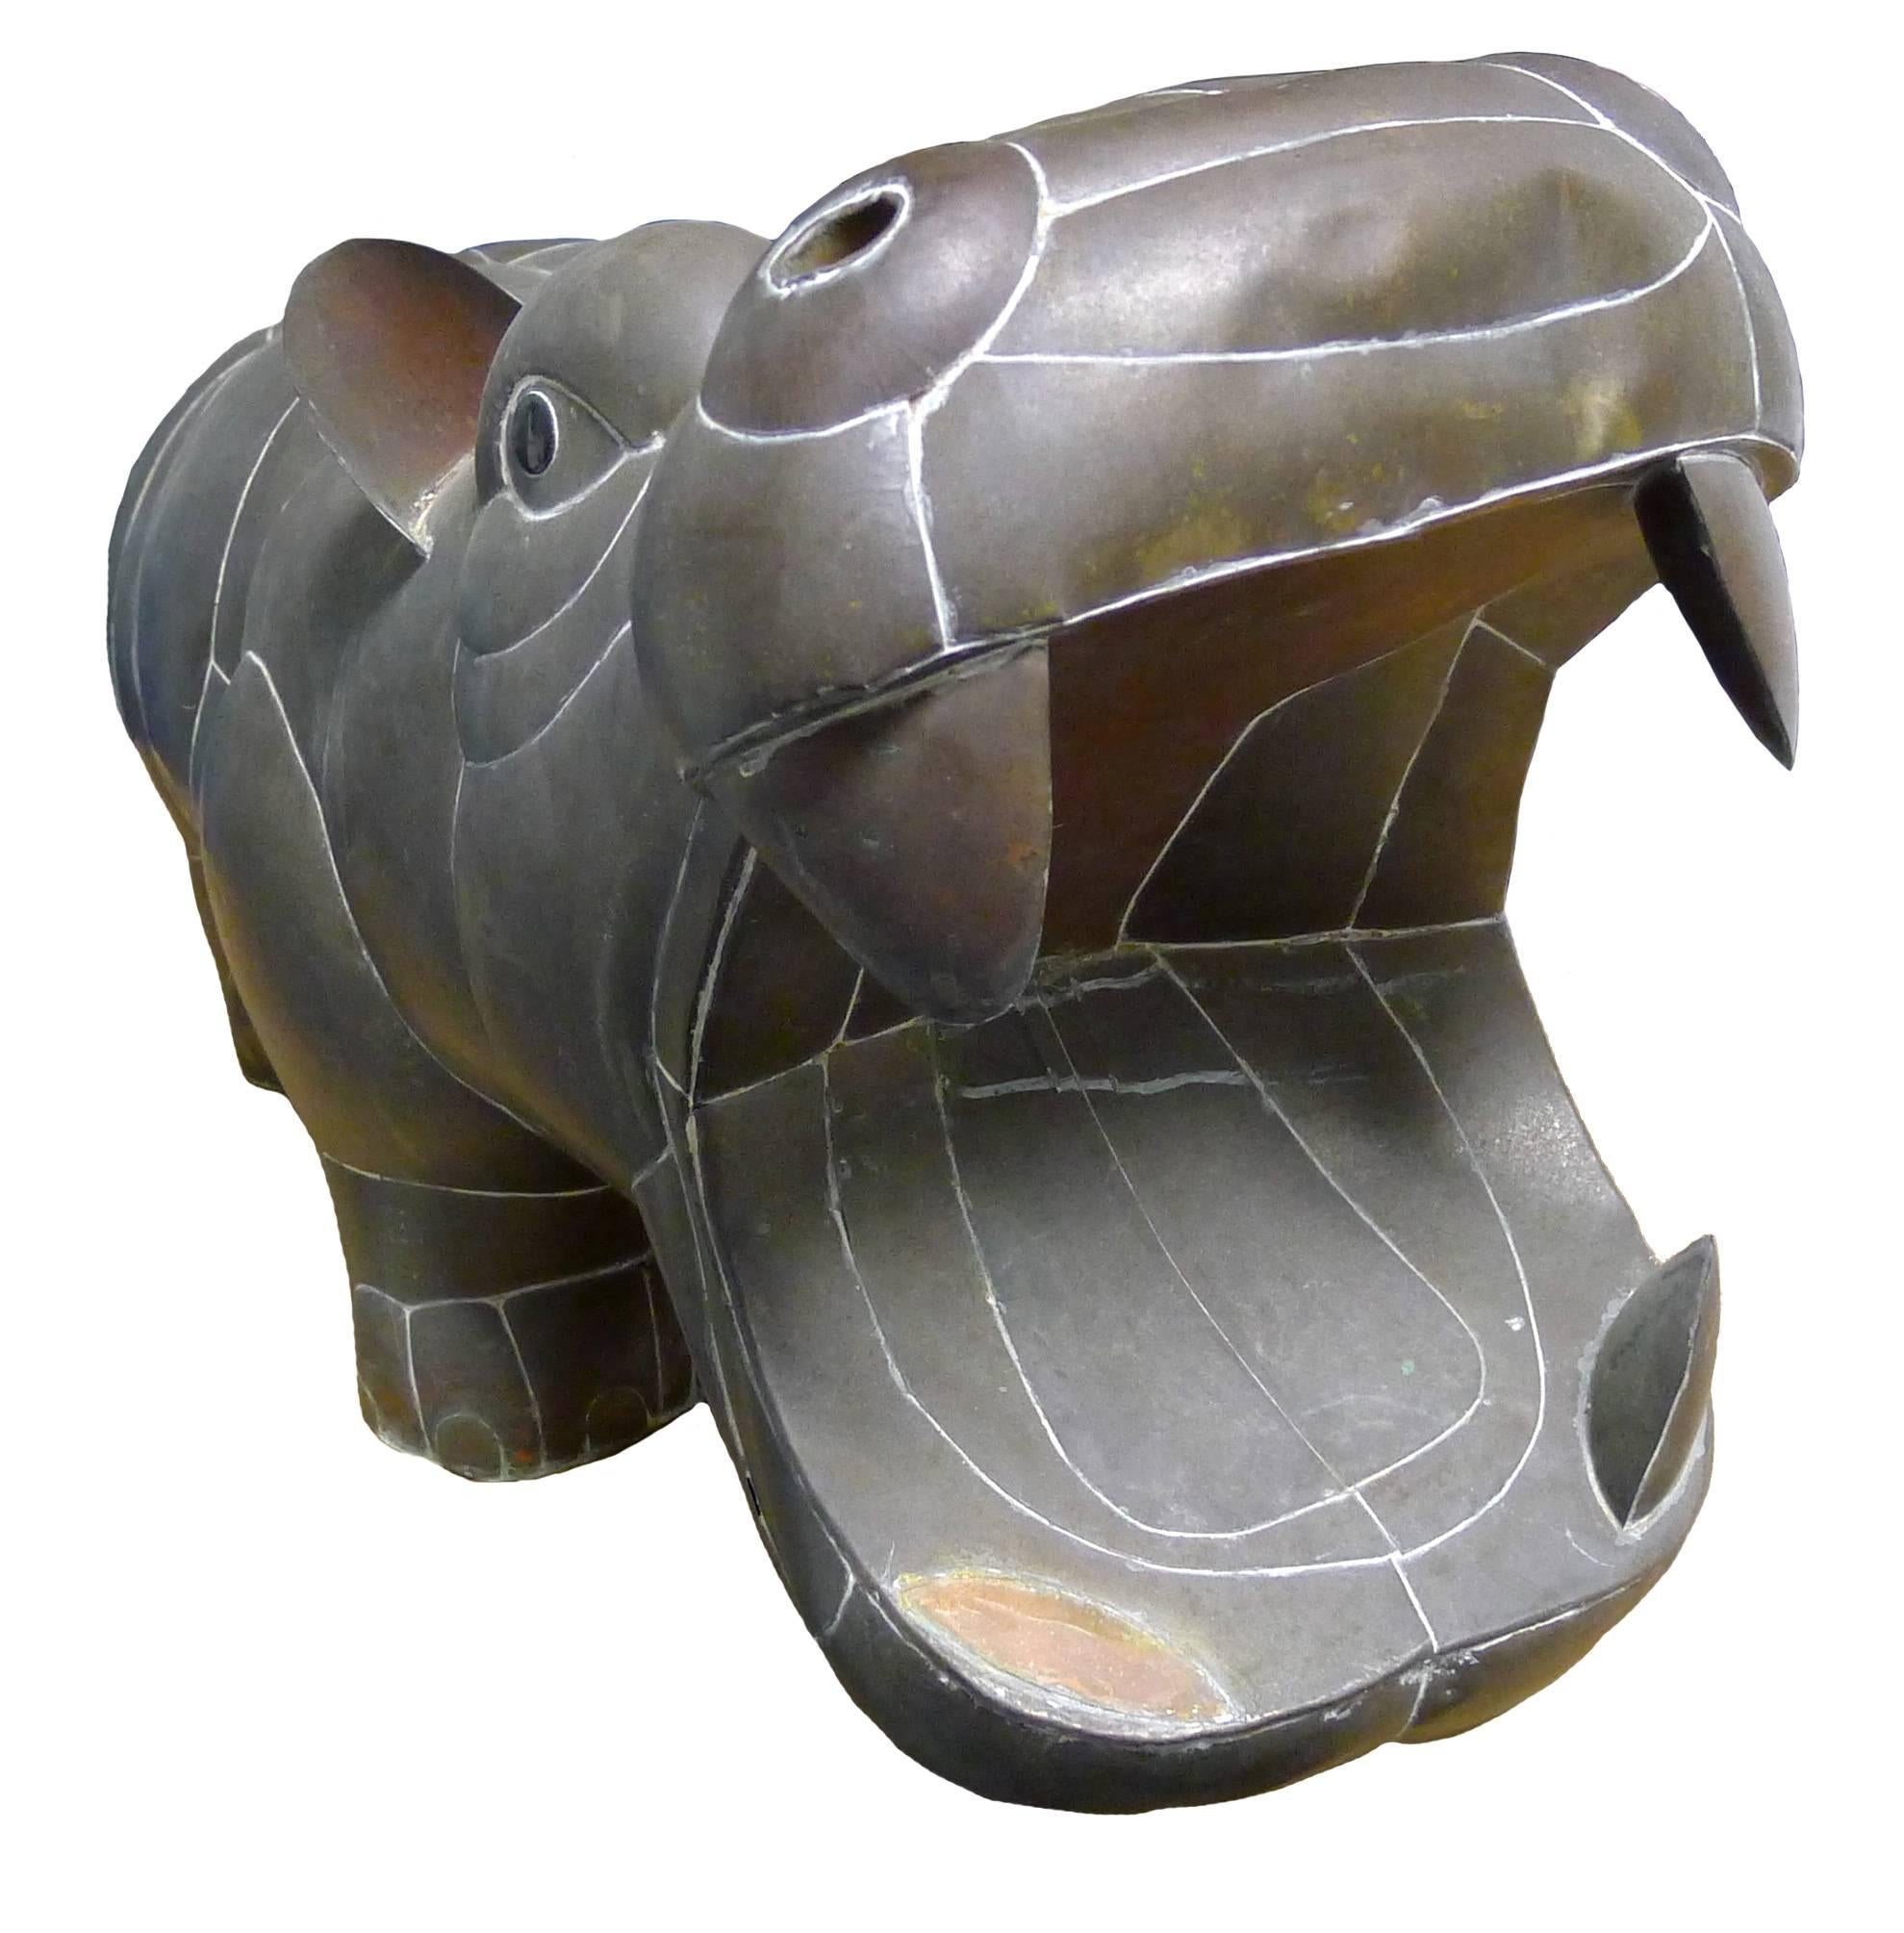 1970s mixed metal patchwork hippo attributed to Sergio Bustamante. Constructed of brass and copper. Overall as found dark unpolished patina. 